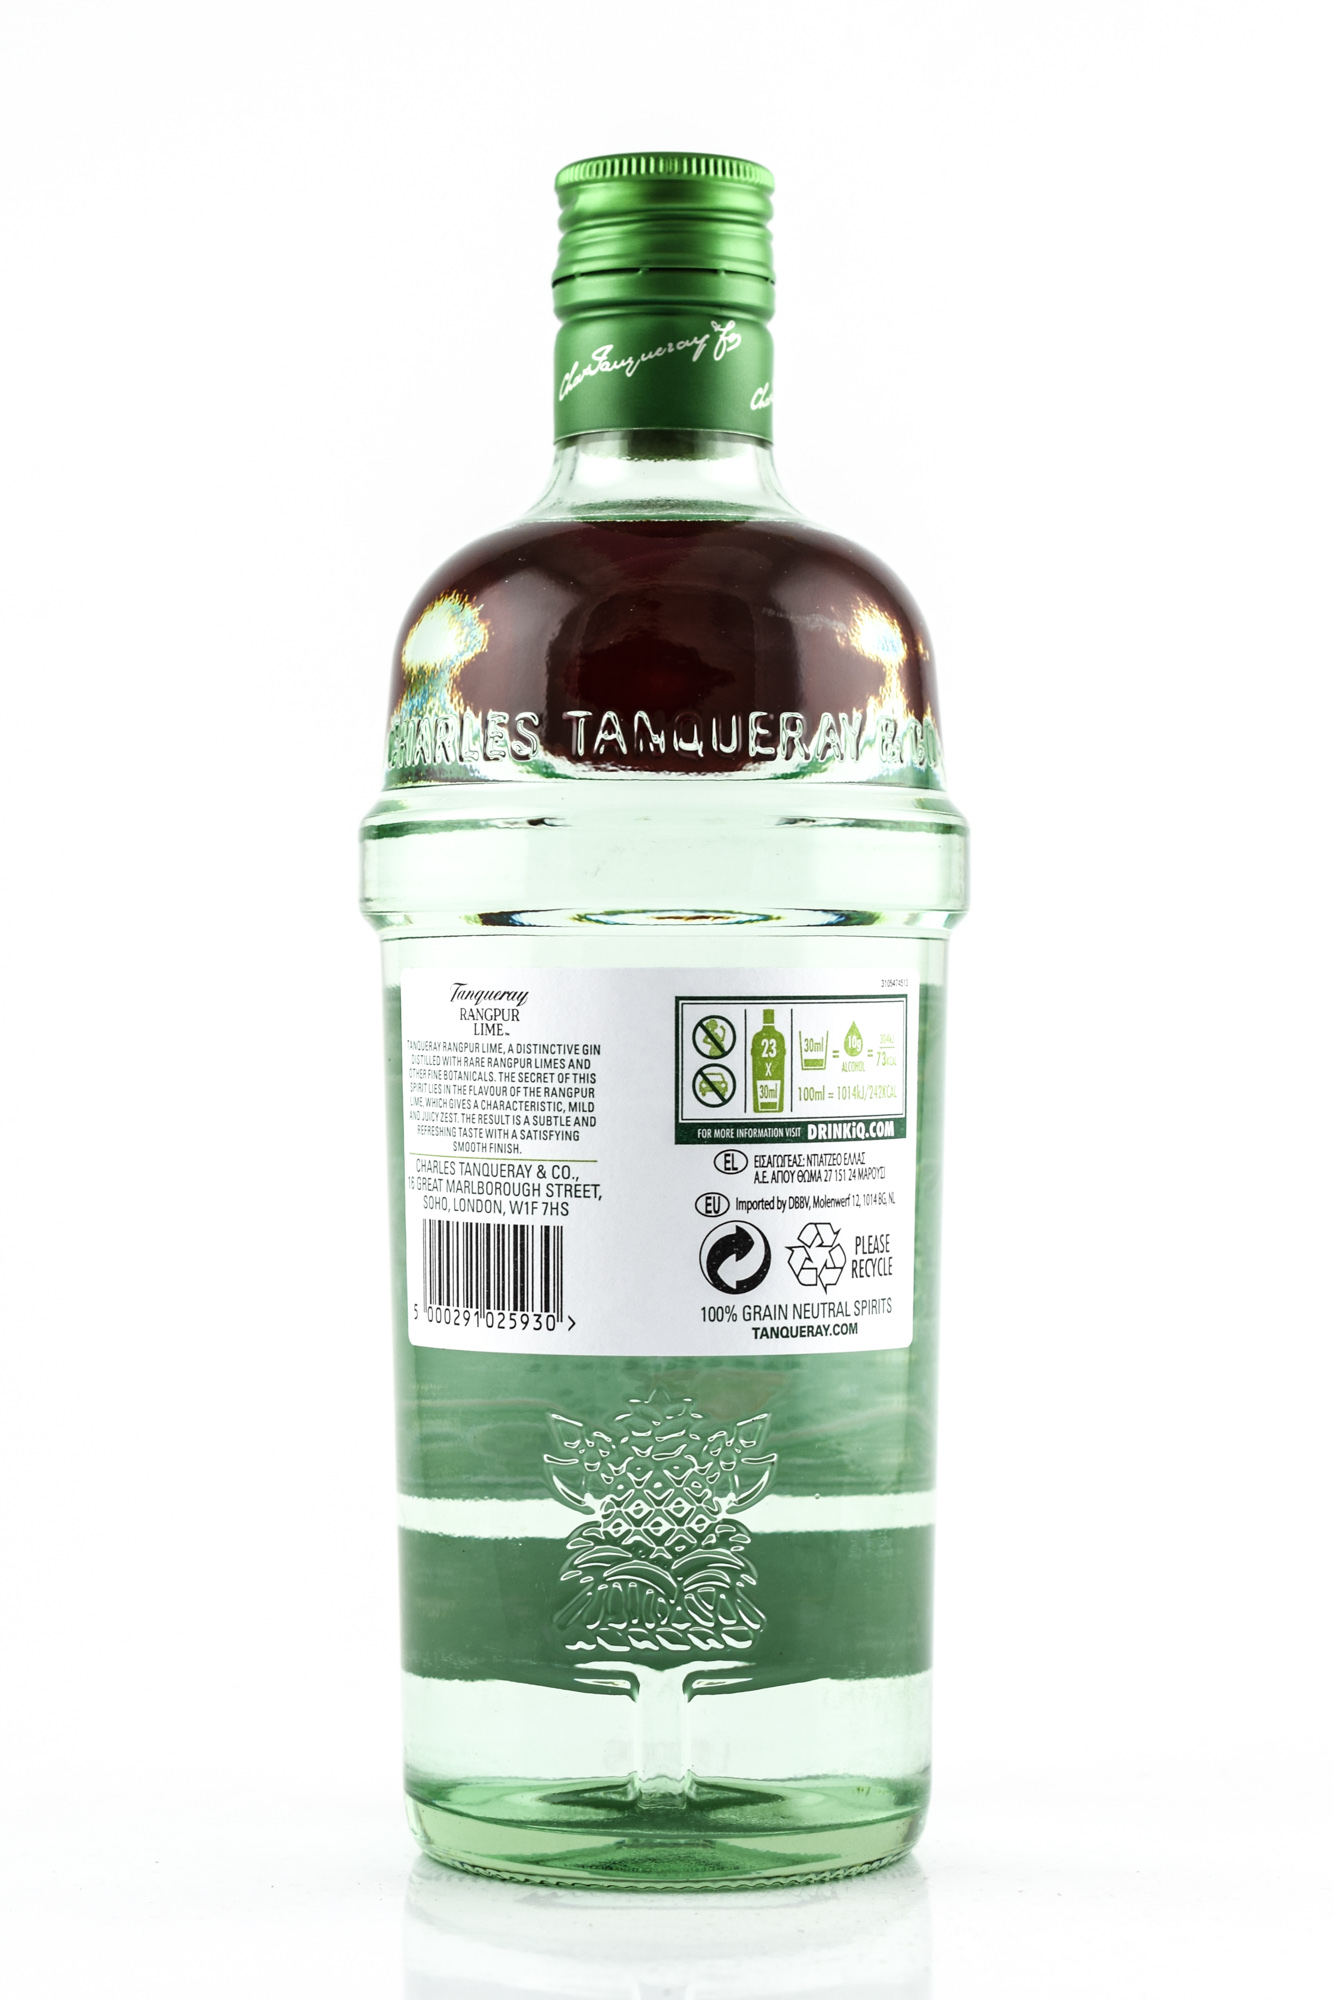 Tanqueray Rangpur Lime at Home of Malts >> explore now! | Home of Malts